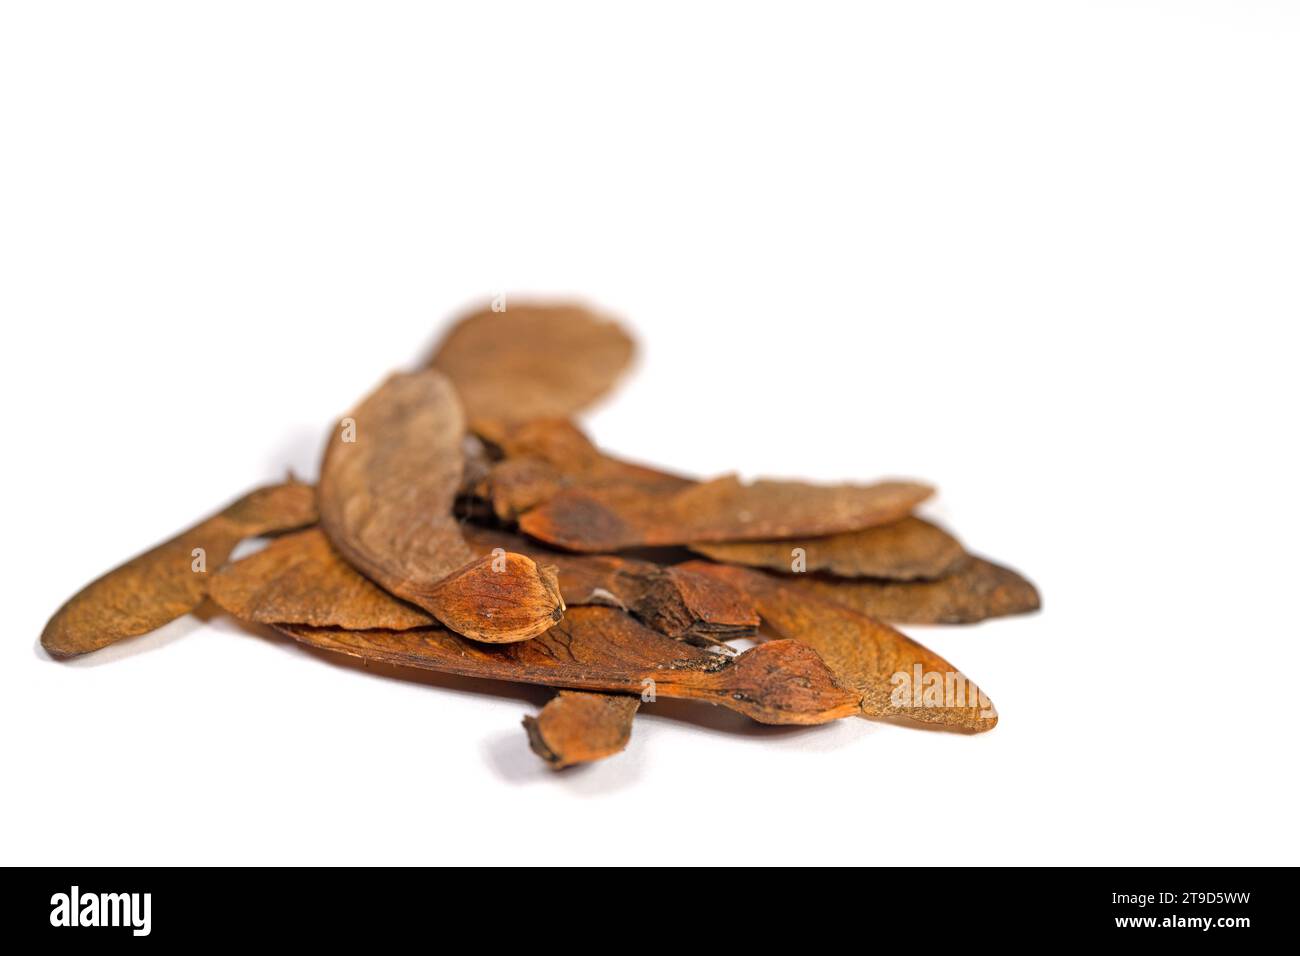 Ripe maple seed against white background Stock Photo